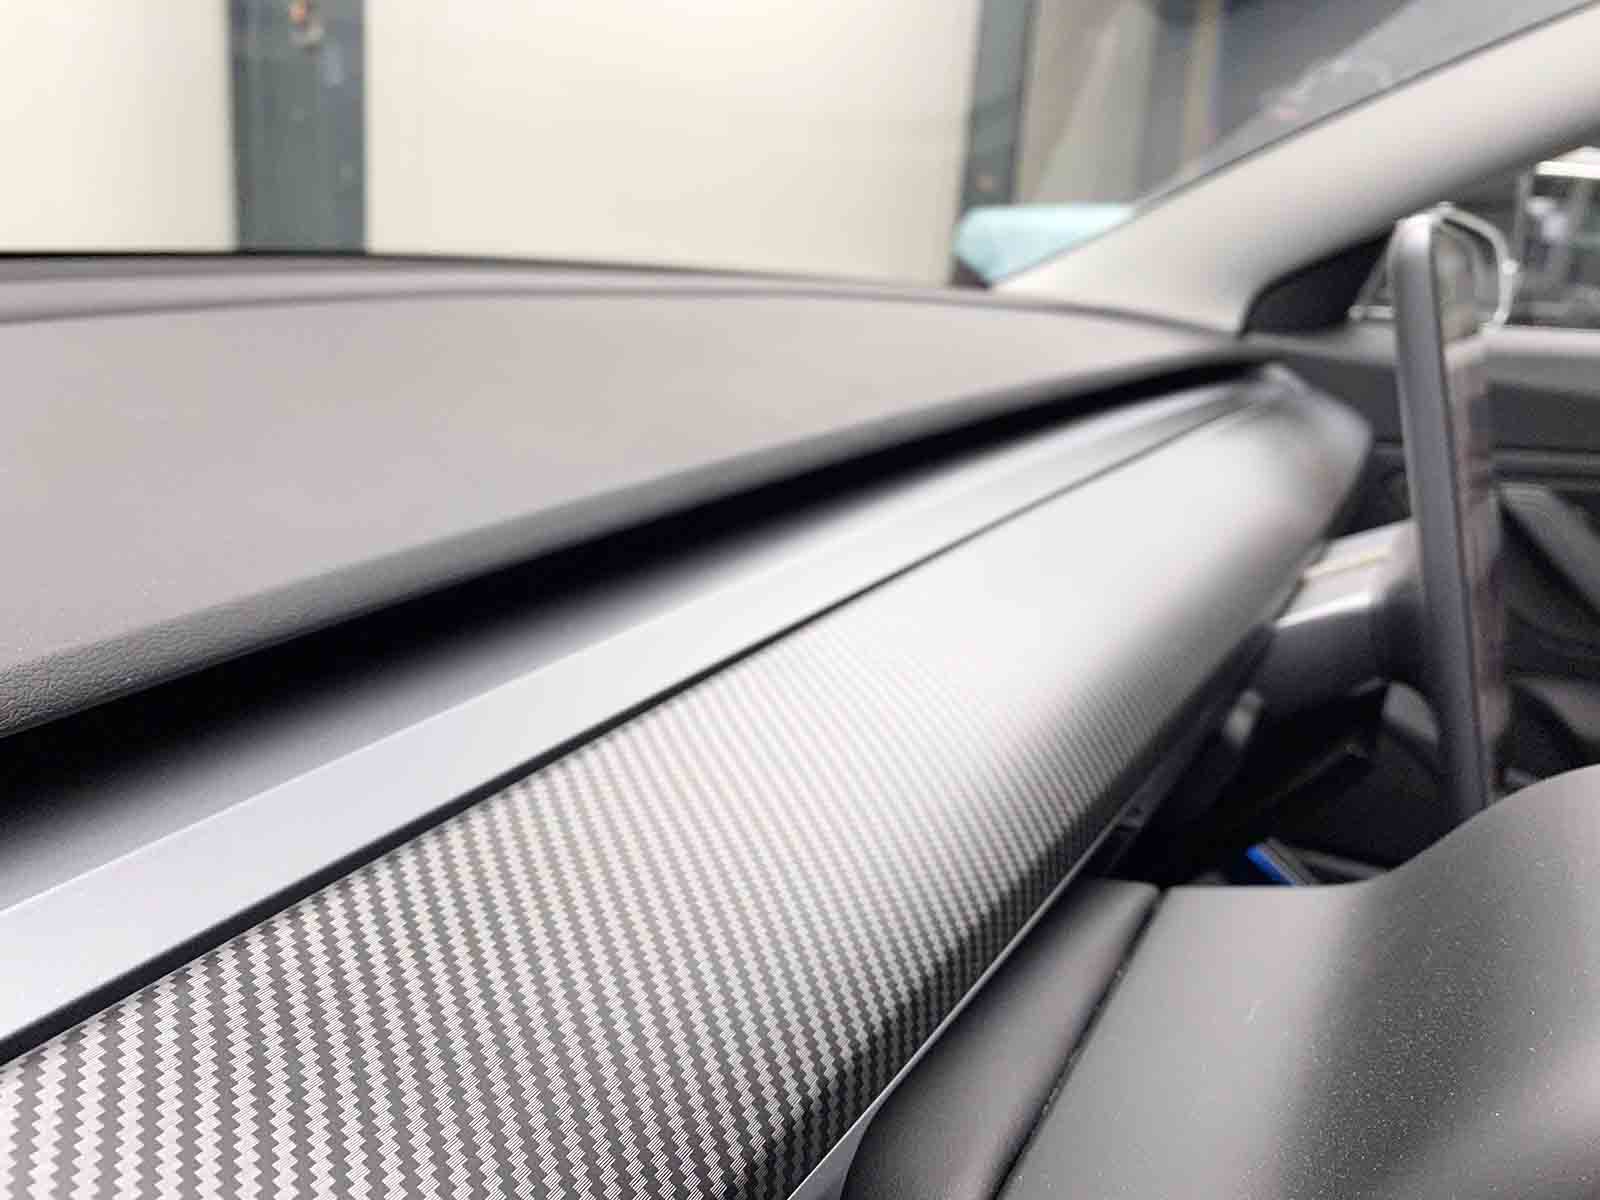 Model 3/Y: Dashboard Console Cover (ABS+Coating) - Torque Alliance